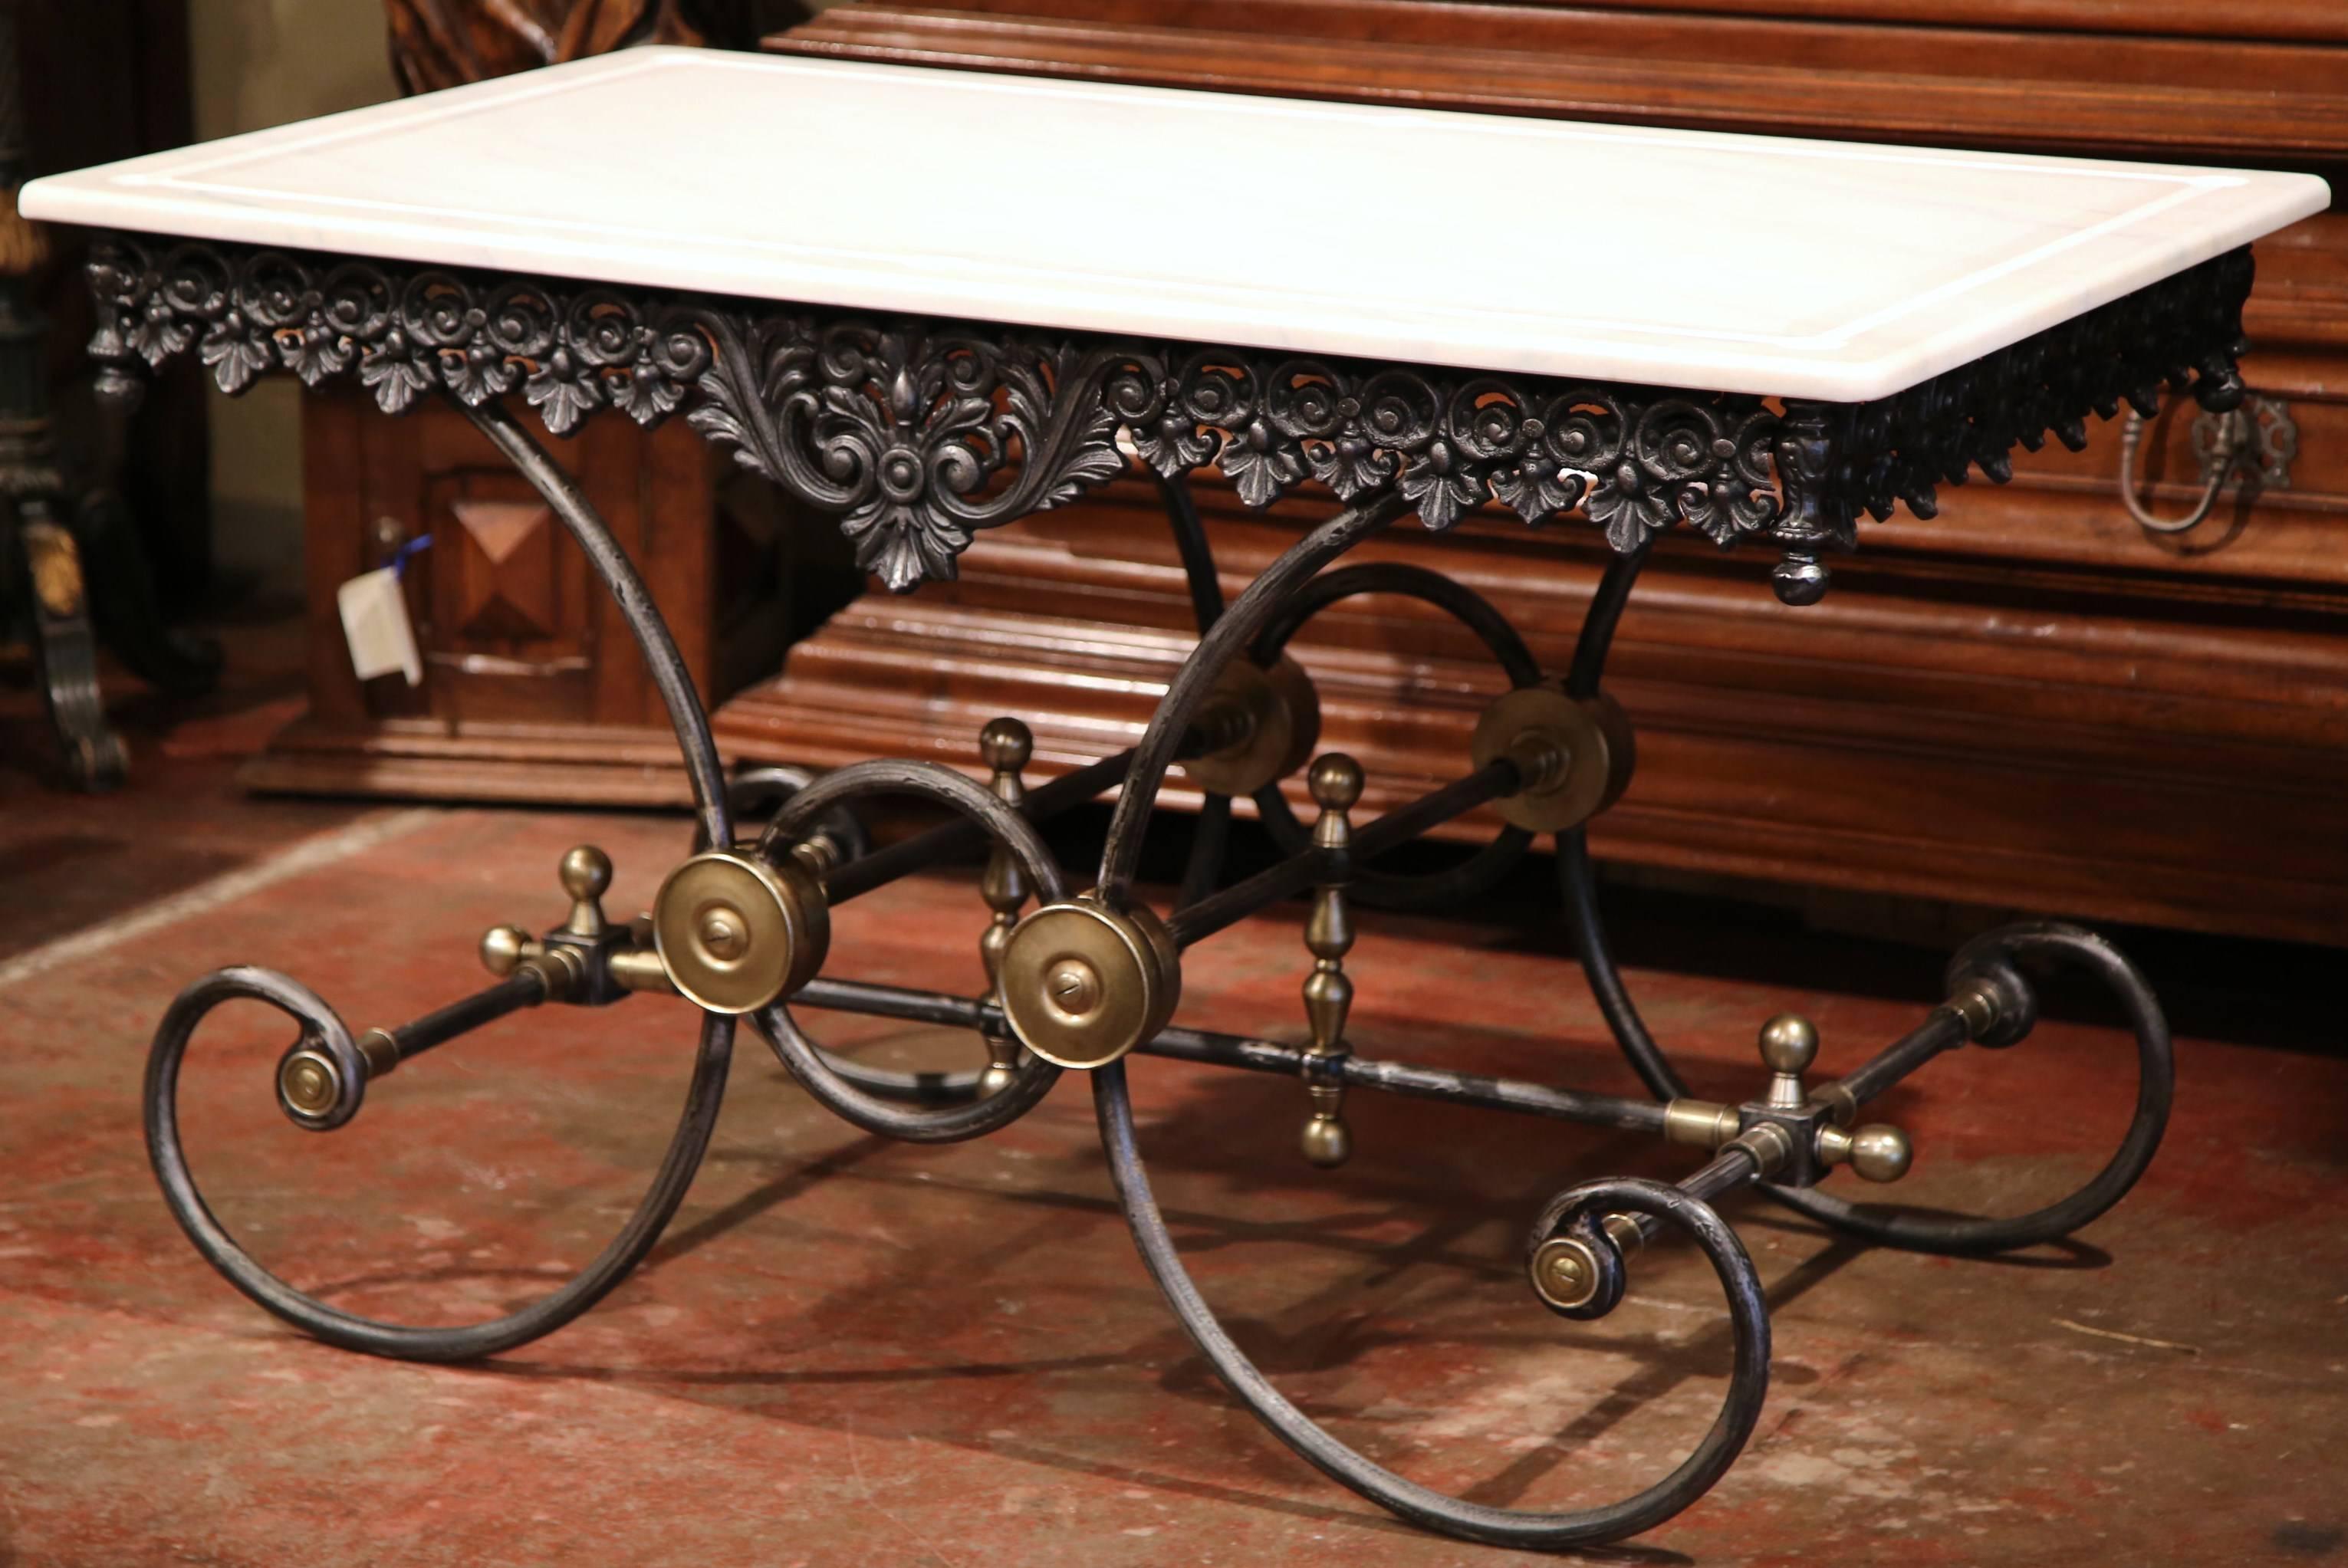 Hand-Crafted Polished Iron Butcher Pastry Table with Marble Top and Brass Mounts from France